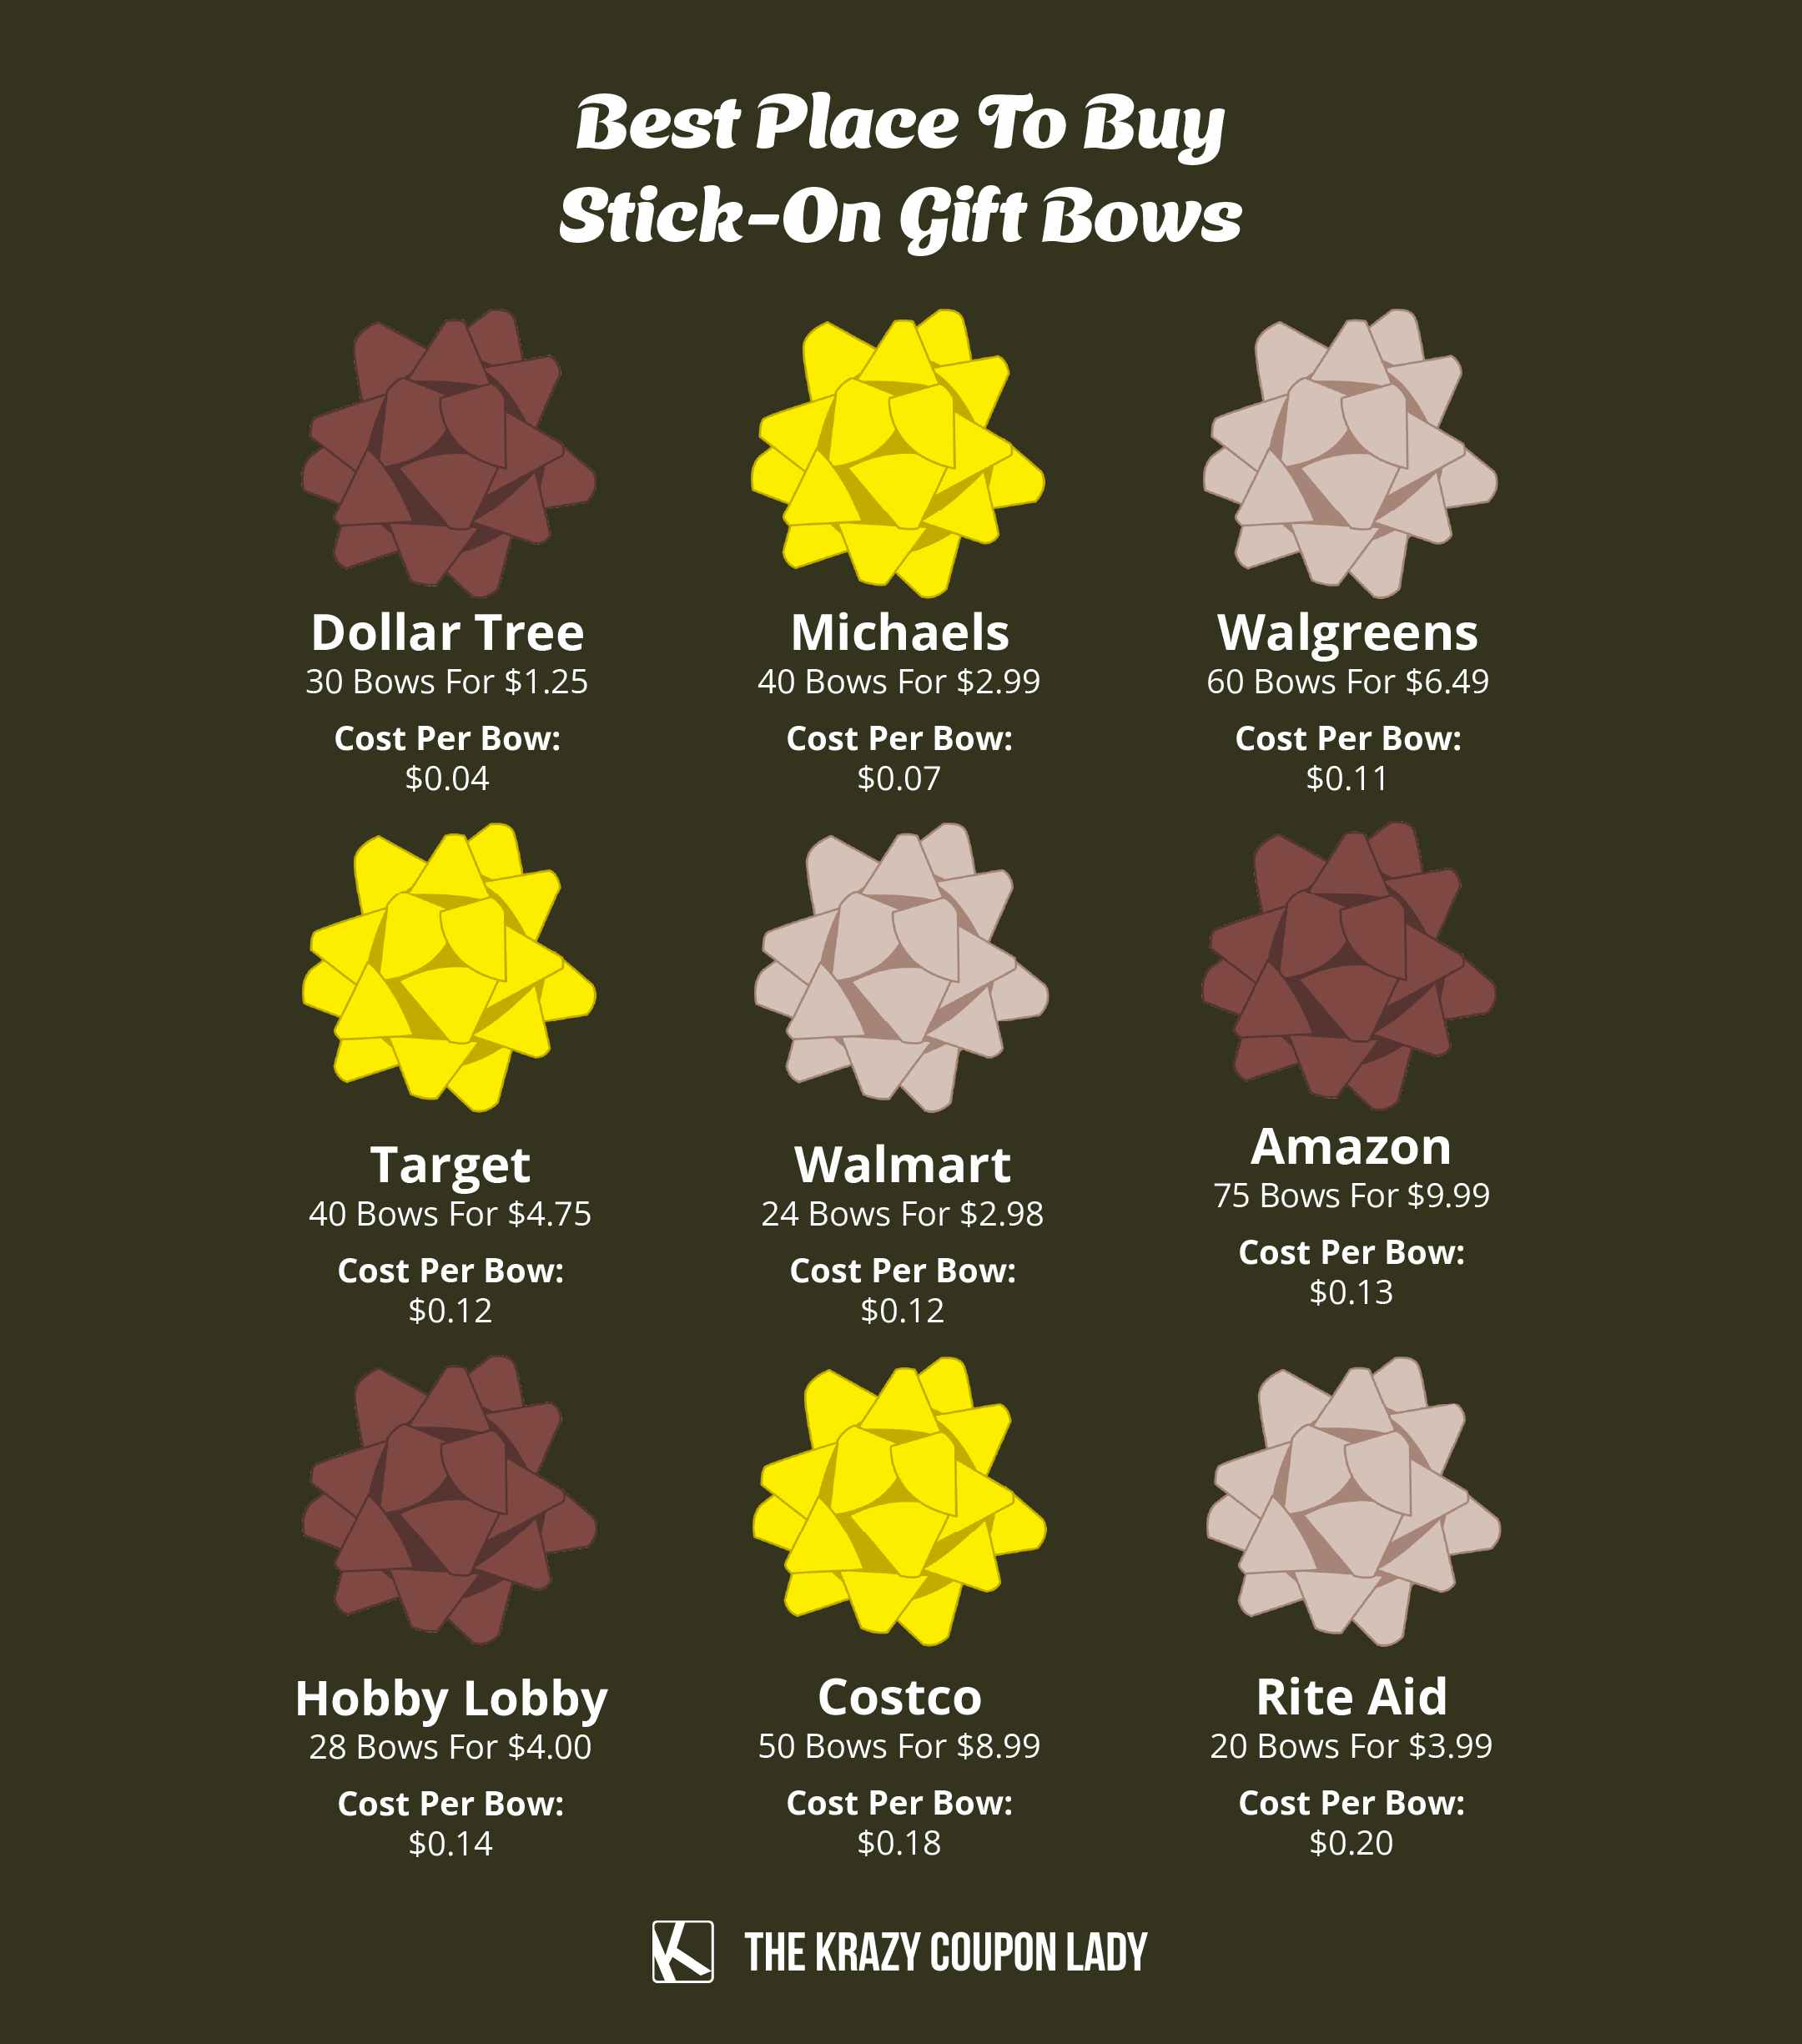 best place to buy stick-on bows price comparison graphic